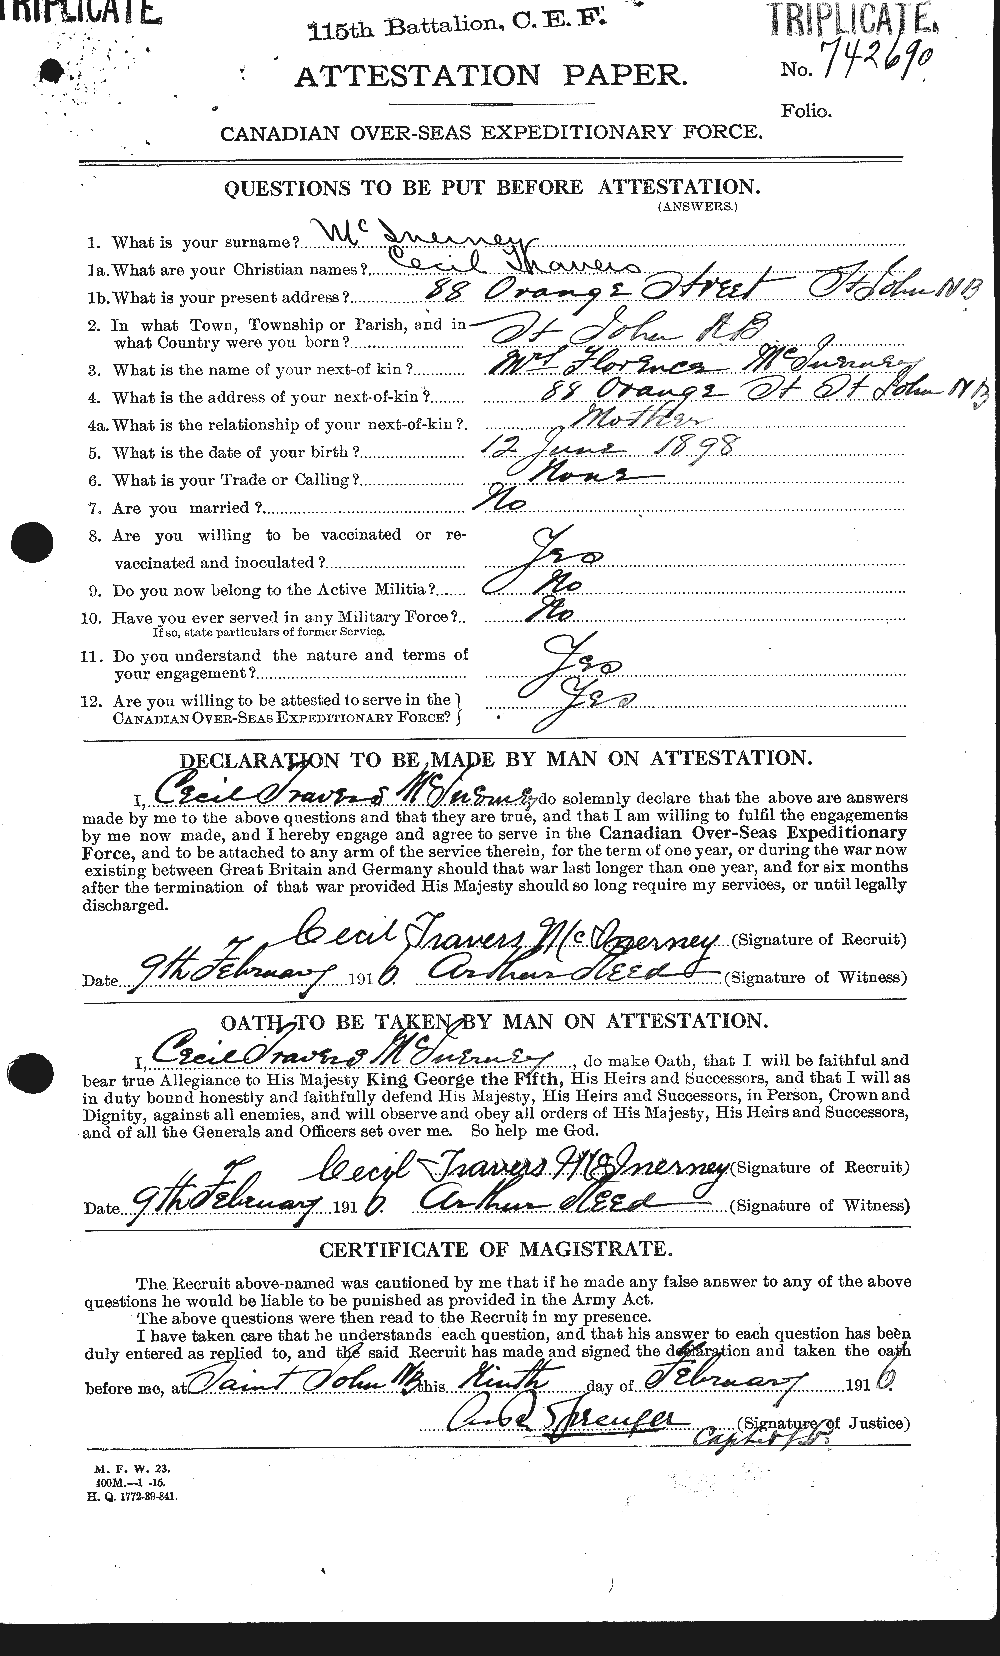 Personnel Records of the First World War - CEF 526571a